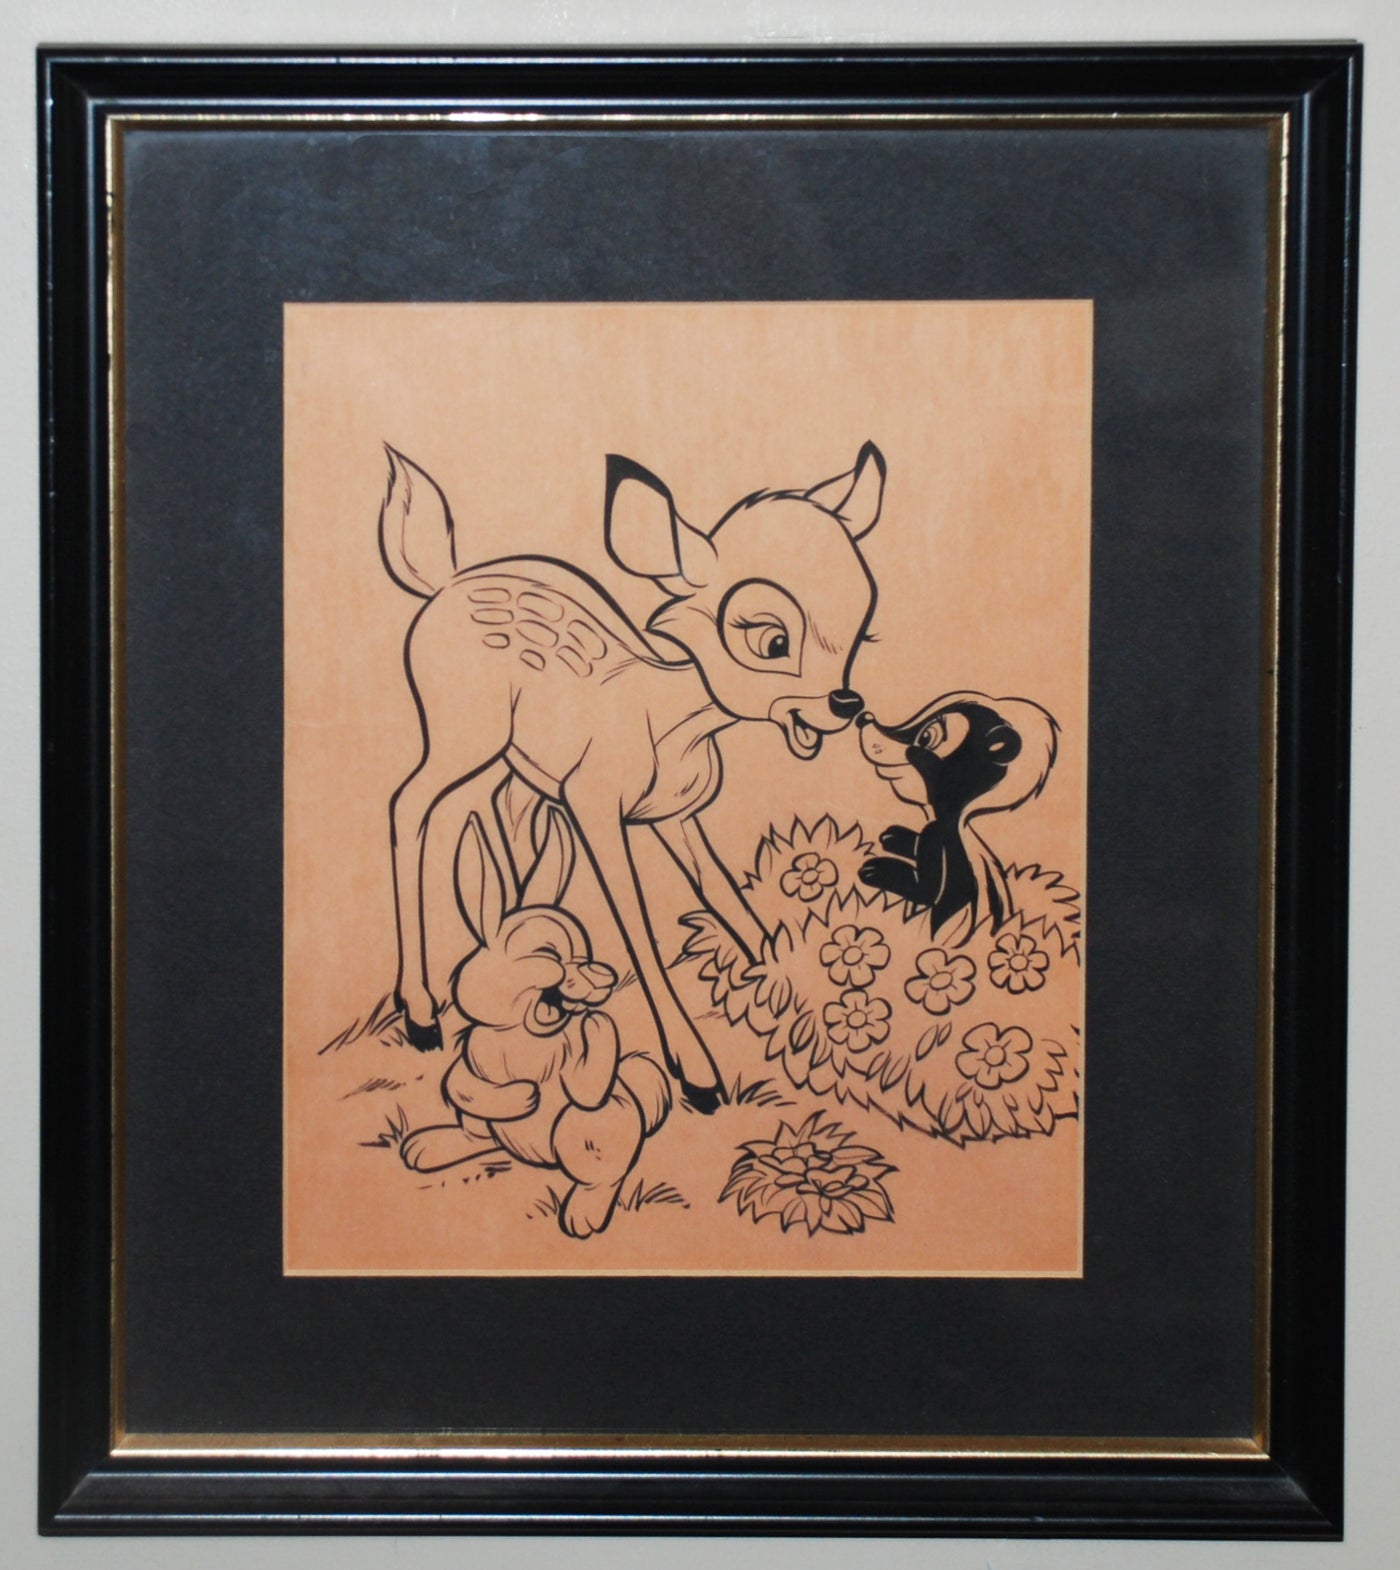 Original Walt Disney Ink on Vellum from Bambi featuring young Bambi, Flower, and Thumper